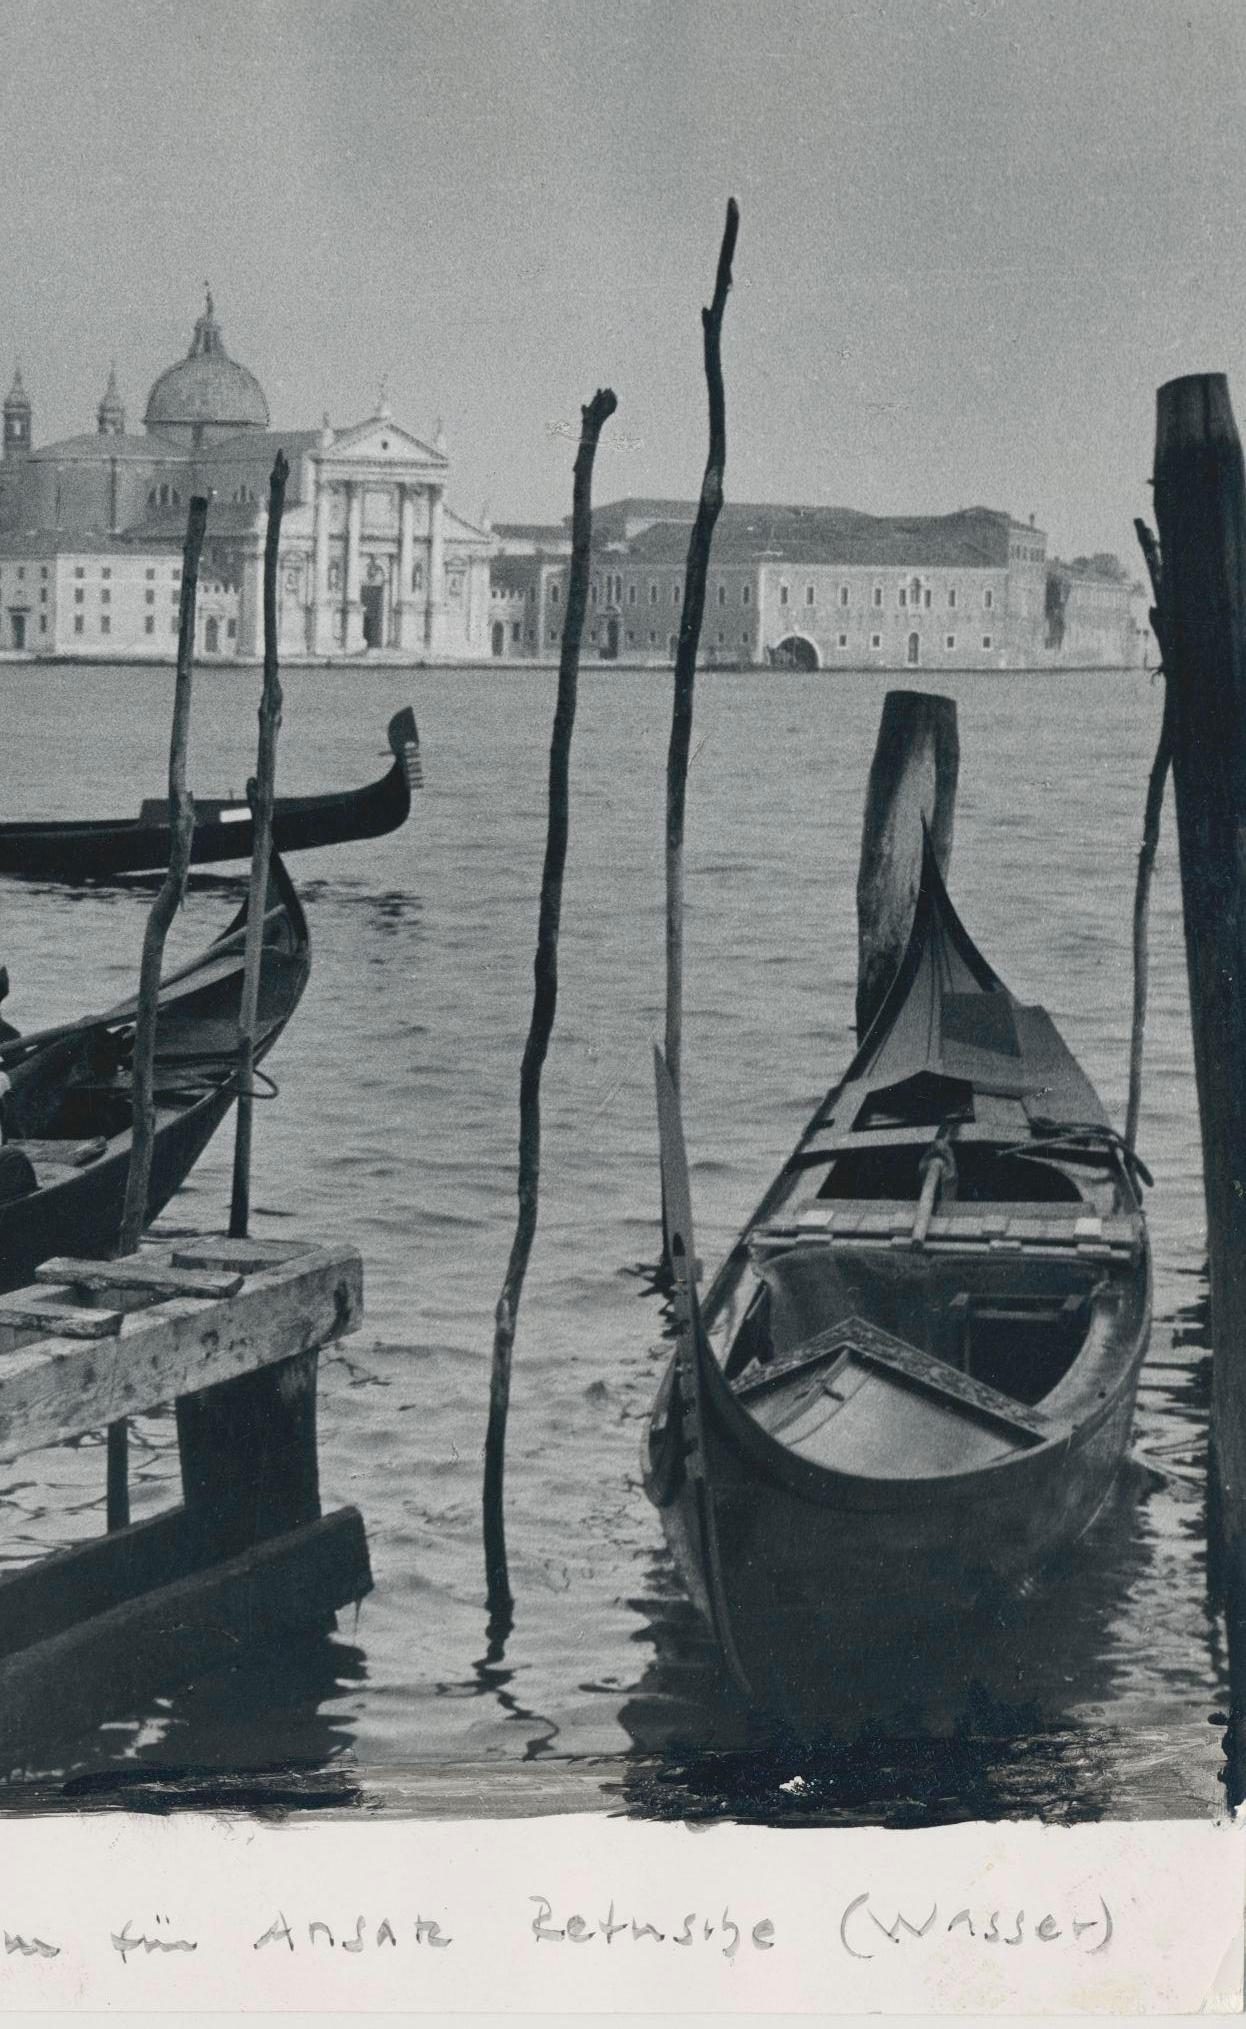 Venice - Gondolas on Waterfront, Italy, 1950s, 17, 3 x 11, 5 cm - Modern Photograph by Erich Andres